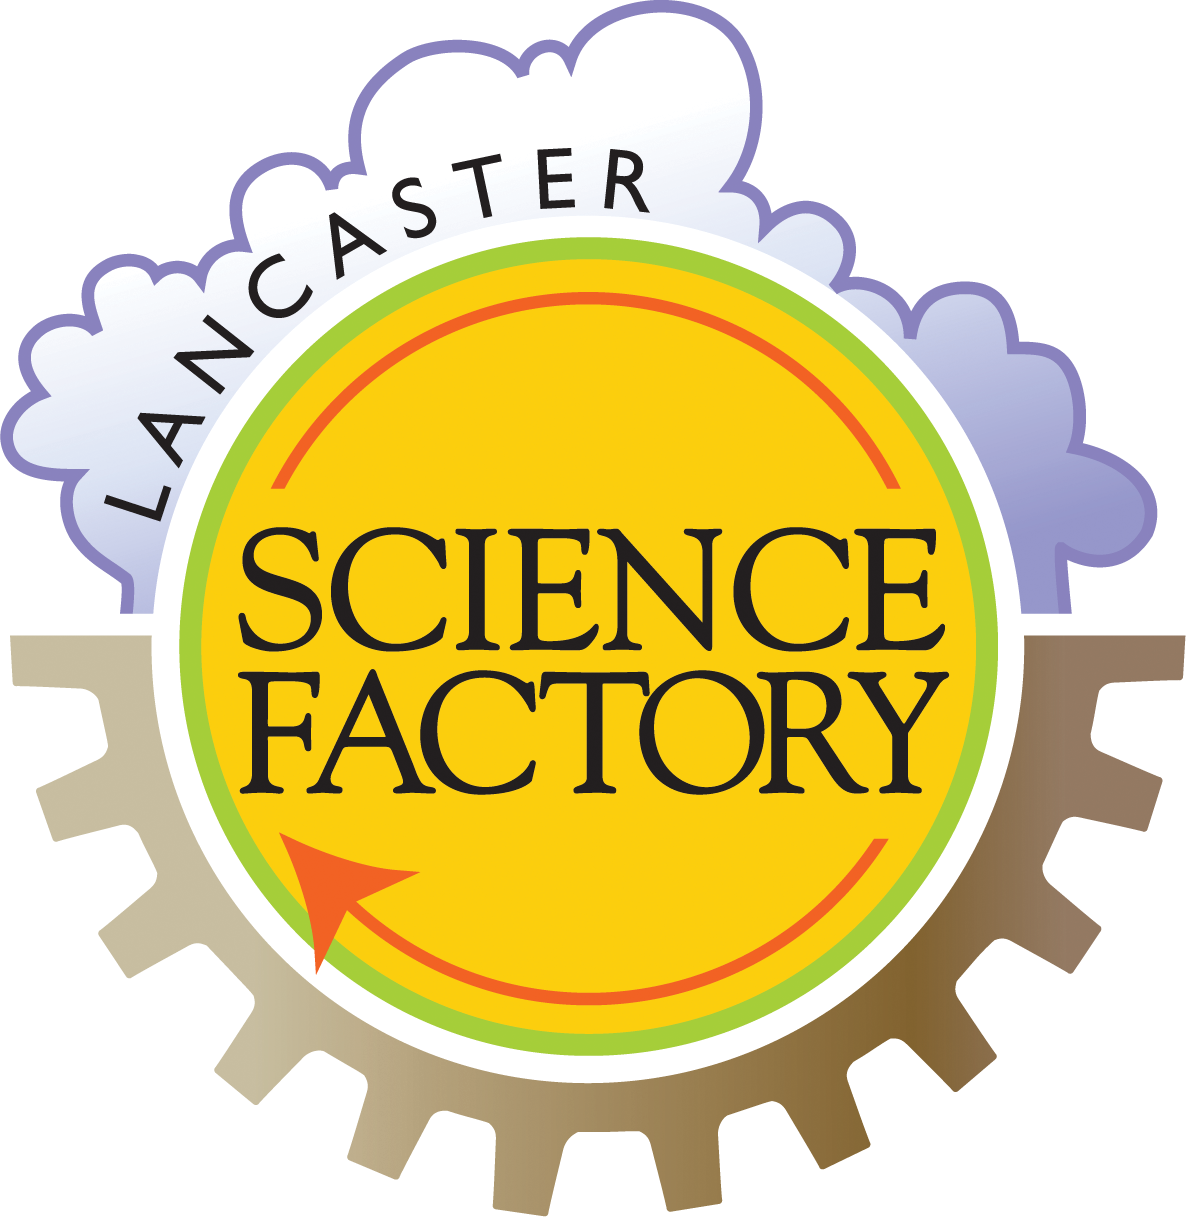 Science Factory logo of a gear with the museum's name.